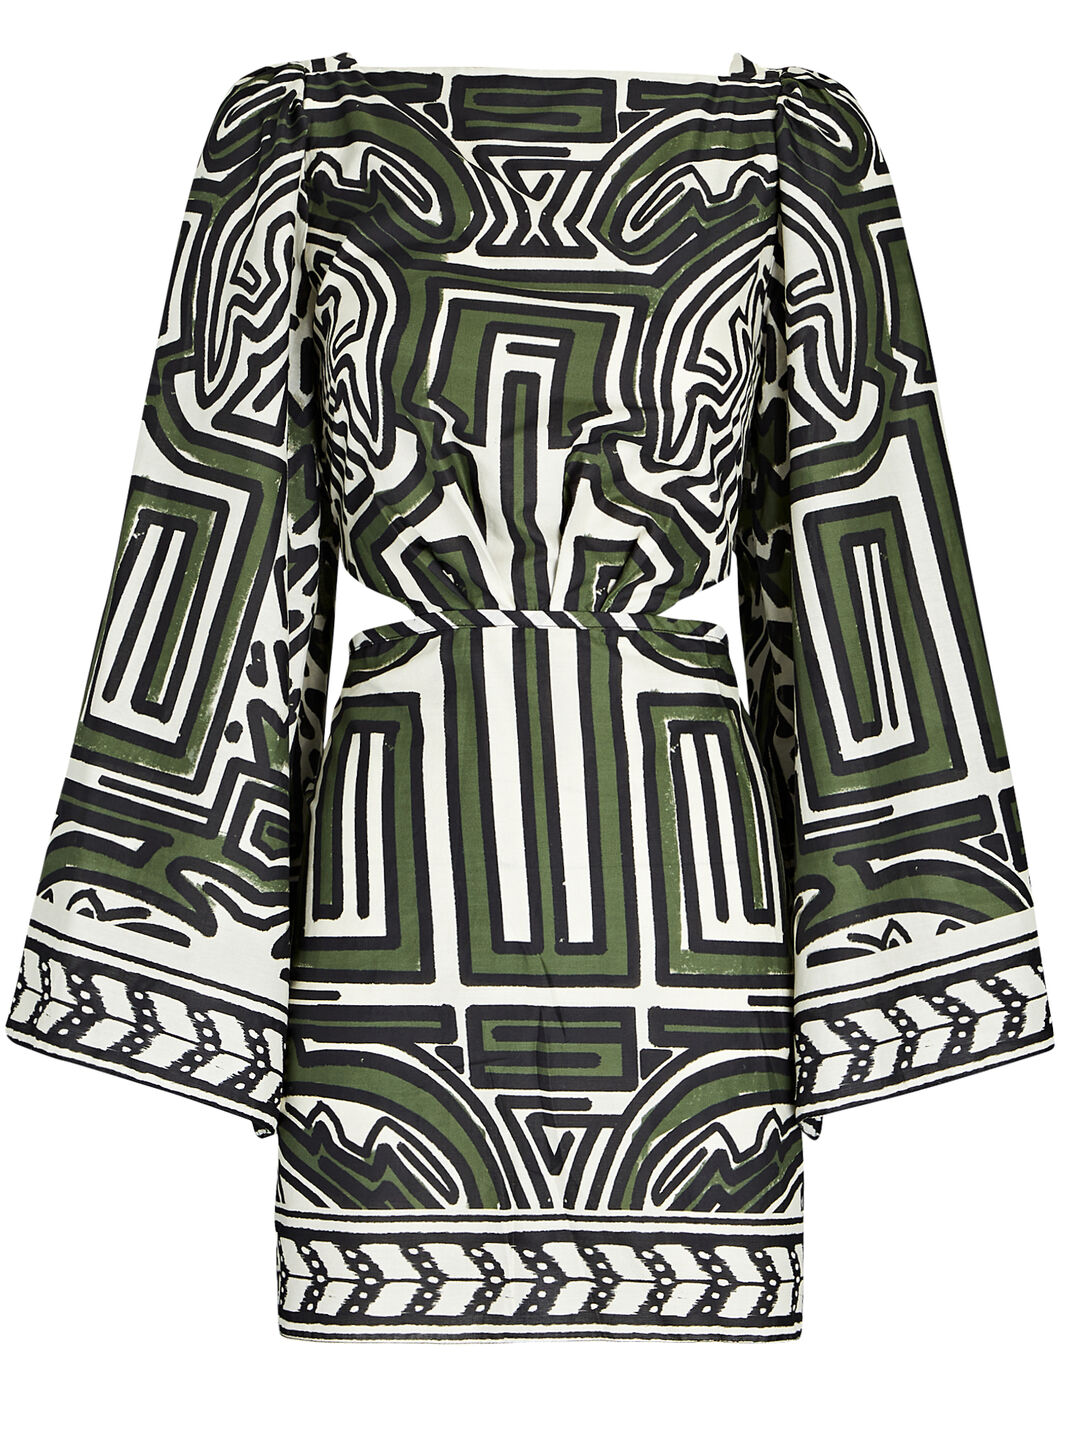 Ethnic Notes Printed Voile Mini Dress